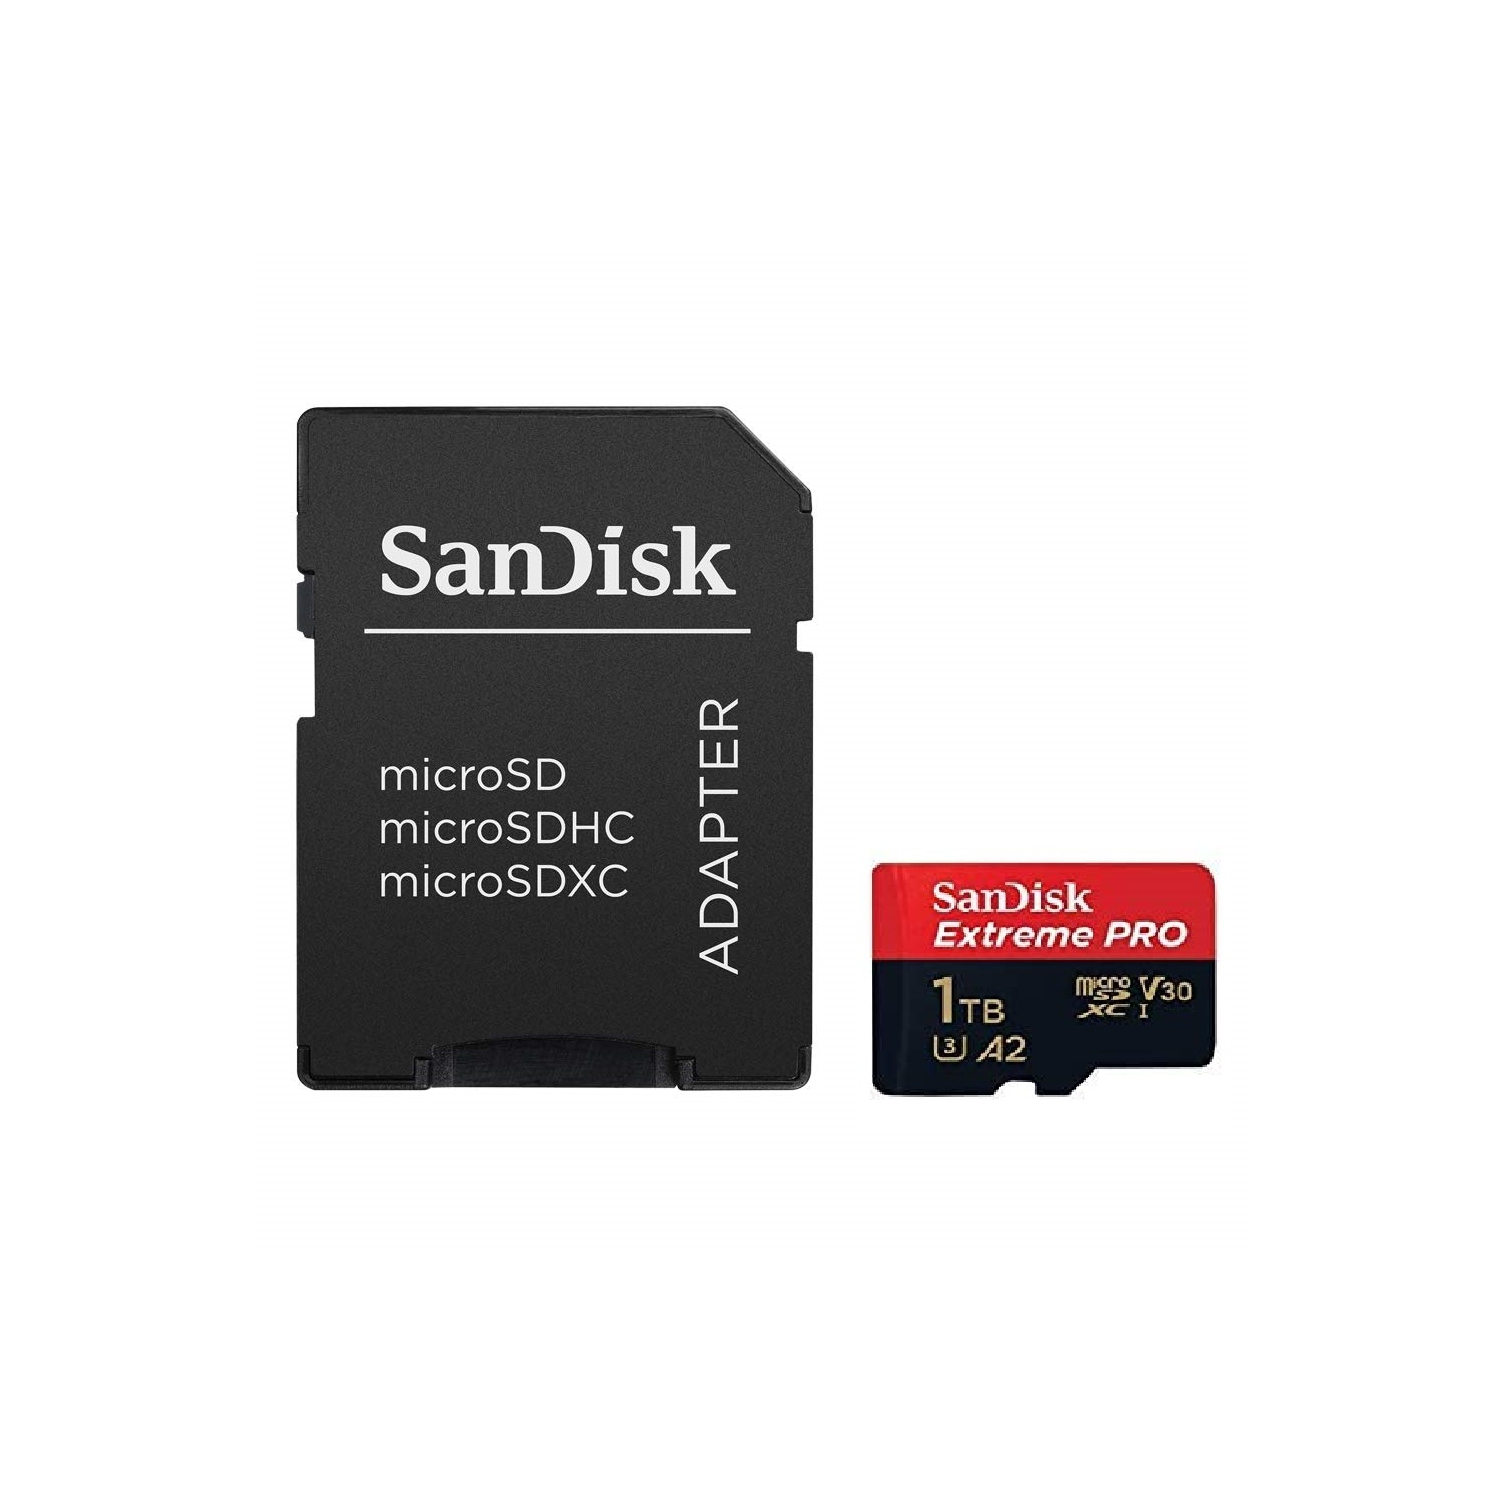 SanDisk Extreme PRO 1TB microSDXC UHS-I micro SD Card with Adapter  SDSQXCZ-1T00